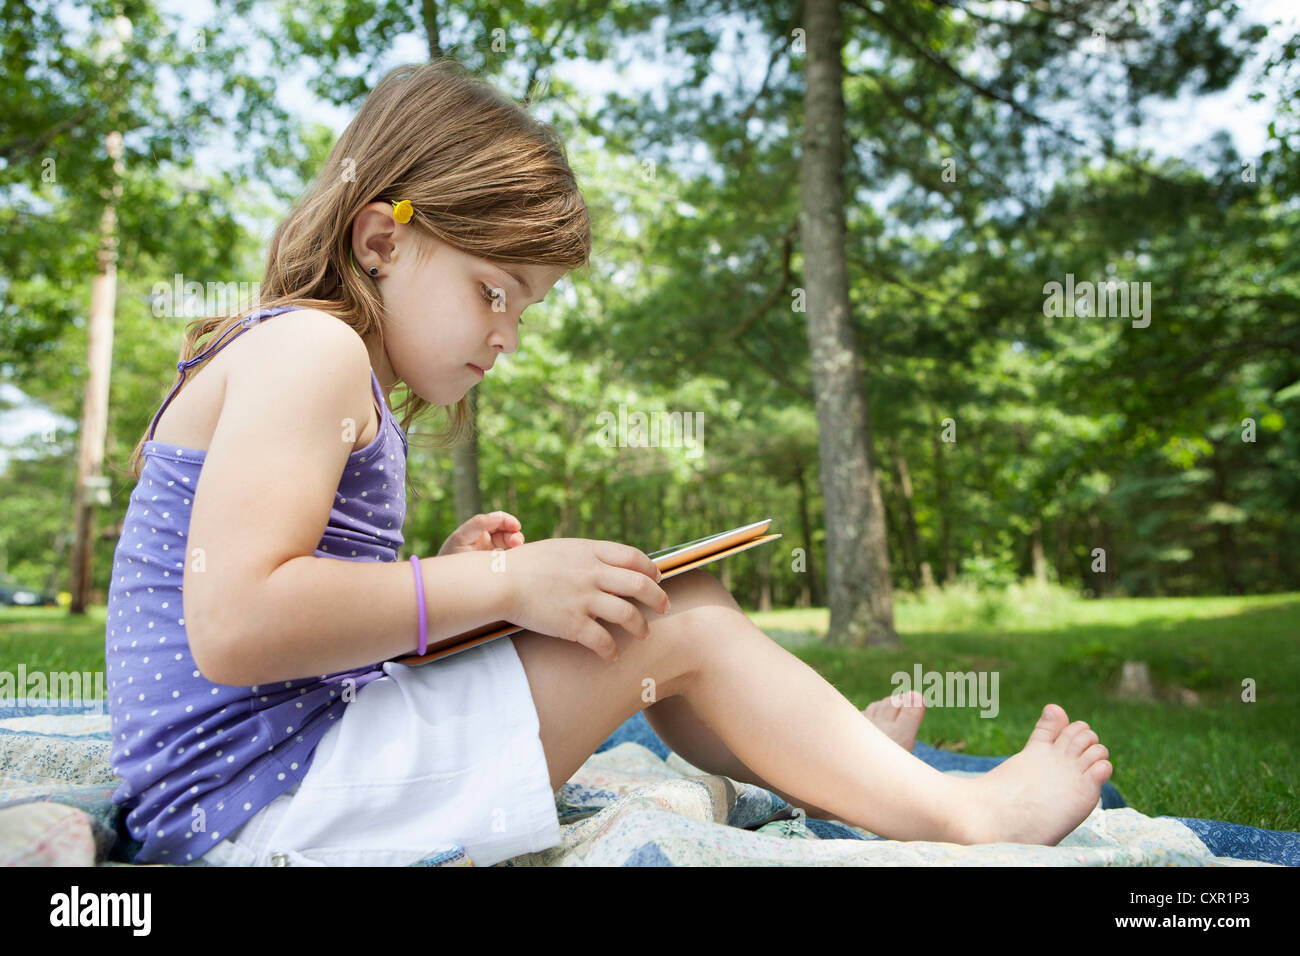 Girl sitting on picnic blanket with digital tablet Stock Photo